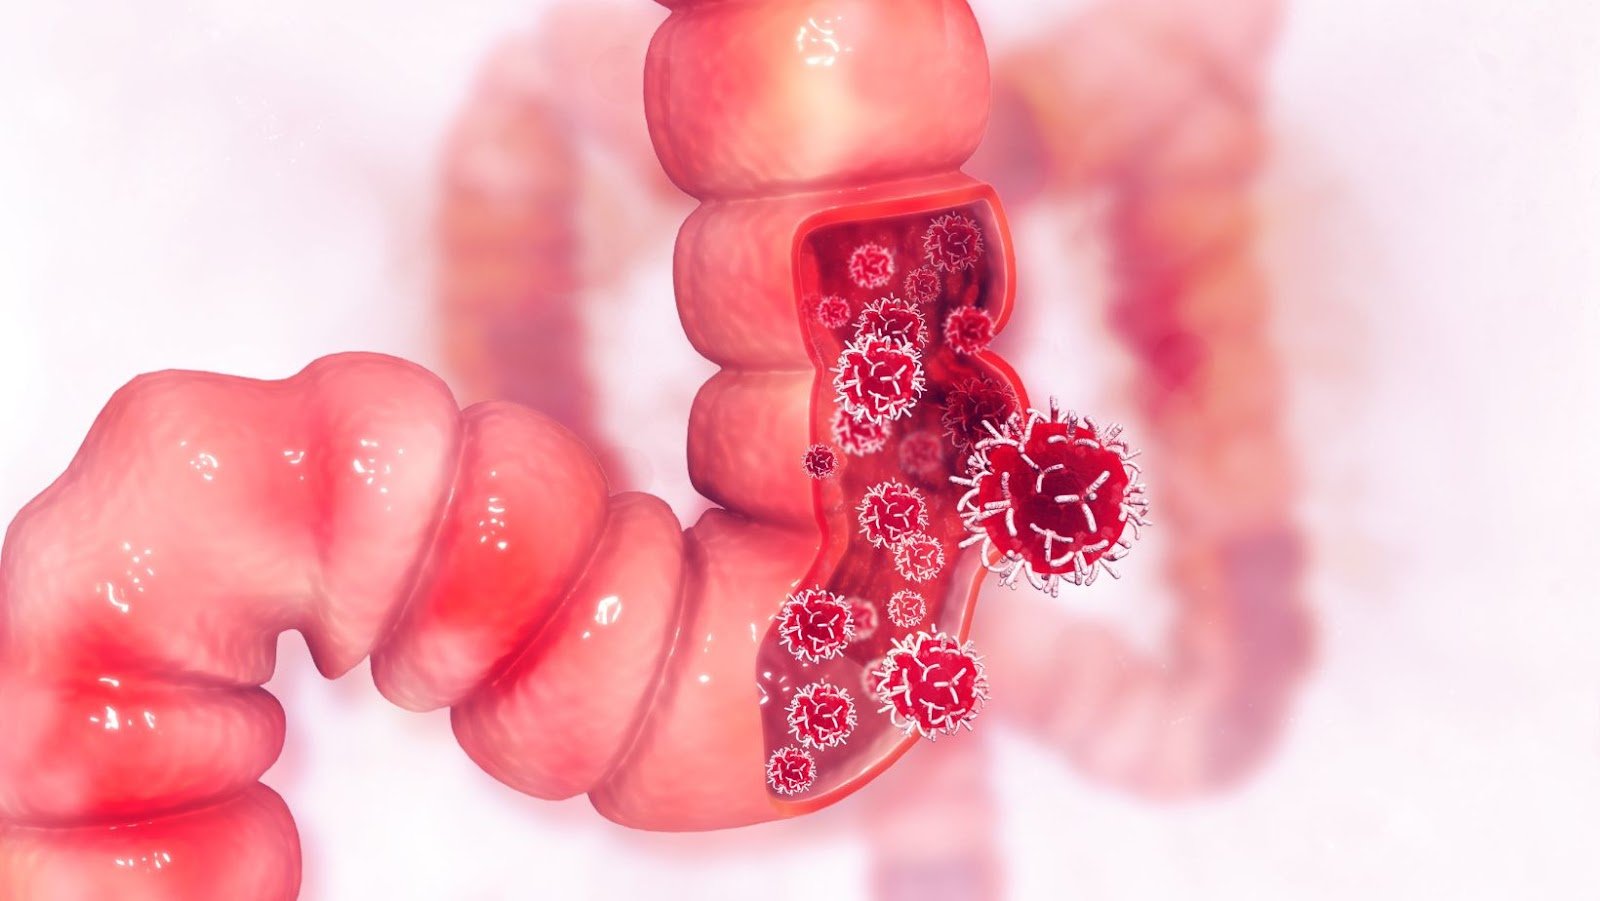 What Are The Warning Signs Of Colon Cancer